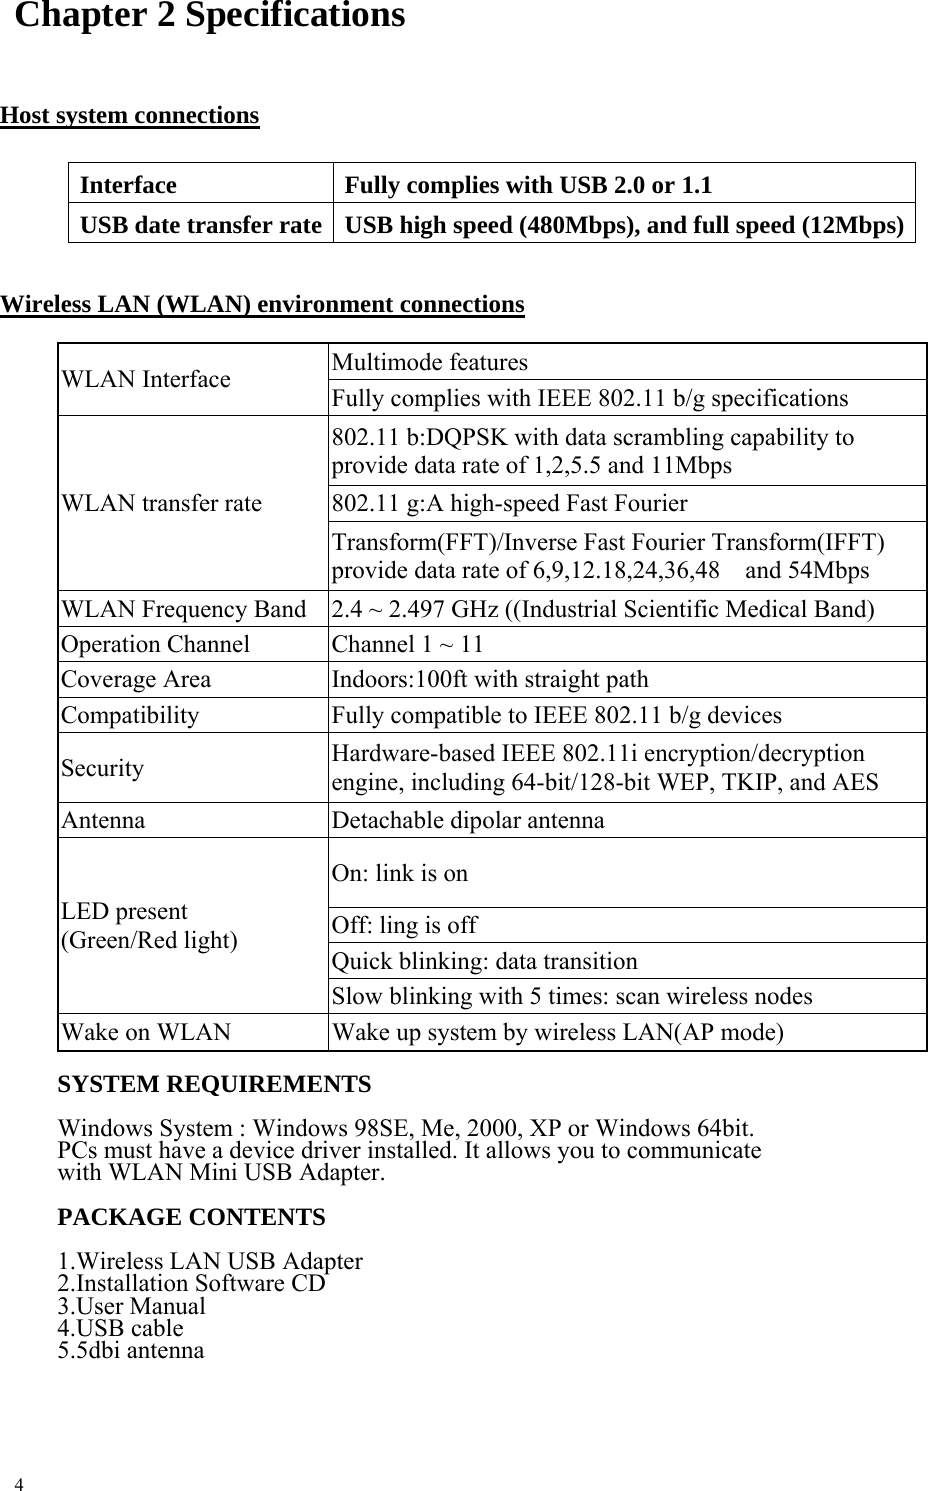  Chapter 2 Specifications  Host system connections  Interface  Fully complies with USB 2.0 or 1.1 USB date transfer rate  USB high speed (480Mbps), and full speed (12Mbps) Wireless LAN (WLAN) environment connections  Multimode features WLAN Interface  Fully complies with IEEE 802.11 b/g specifications 802.11 b:DQPSK with data scrambling capability to provide data rate of 1,2,5.5 and 11Mbps 802.11 g:A high-speed Fast Fourier WLAN transfer rate Transform(FFT)/Inverse Fast Fourier Transform(IFFT) provide data rate of 6,9,12.18,24,36,48    and 54Mbps WLAN Frequency Band  2.4 ~ 2.497 GHz ((Industrial Scientific Medical Band) Operation Channel  Channel 1 ~ 11 Coverage Area  Indoors:100ft with straight path Compatibility  Fully compatible to IEEE 802.11 b/g devices Security  Hardware-based IEEE 802.11i encryption/decryption engine, including 64-bit/128-bit WEP, TKIP, and AES Antenna  Detachable dipolar antenna On: link is on Off: ling is off Quick blinking: data transition LED present (Green/Red light) Slow blinking with 5 times: scan wireless nodes Wake on WLAN  Wake up system by wireless LAN(AP mode)  SYSTEM REQUIREMENTS  Windows System : Windows 98SE, Me, 2000, XP or Windows 64bit. PCs must have a device driver installed. It allows you to communicate with WLAN Mini USB Adapter.  PACKAGE CONTENTS  1.Wireless LAN USB Adapter 2.Installation Software CD 3.User Manual 4.USB cable 5.5dbi antenna      4 